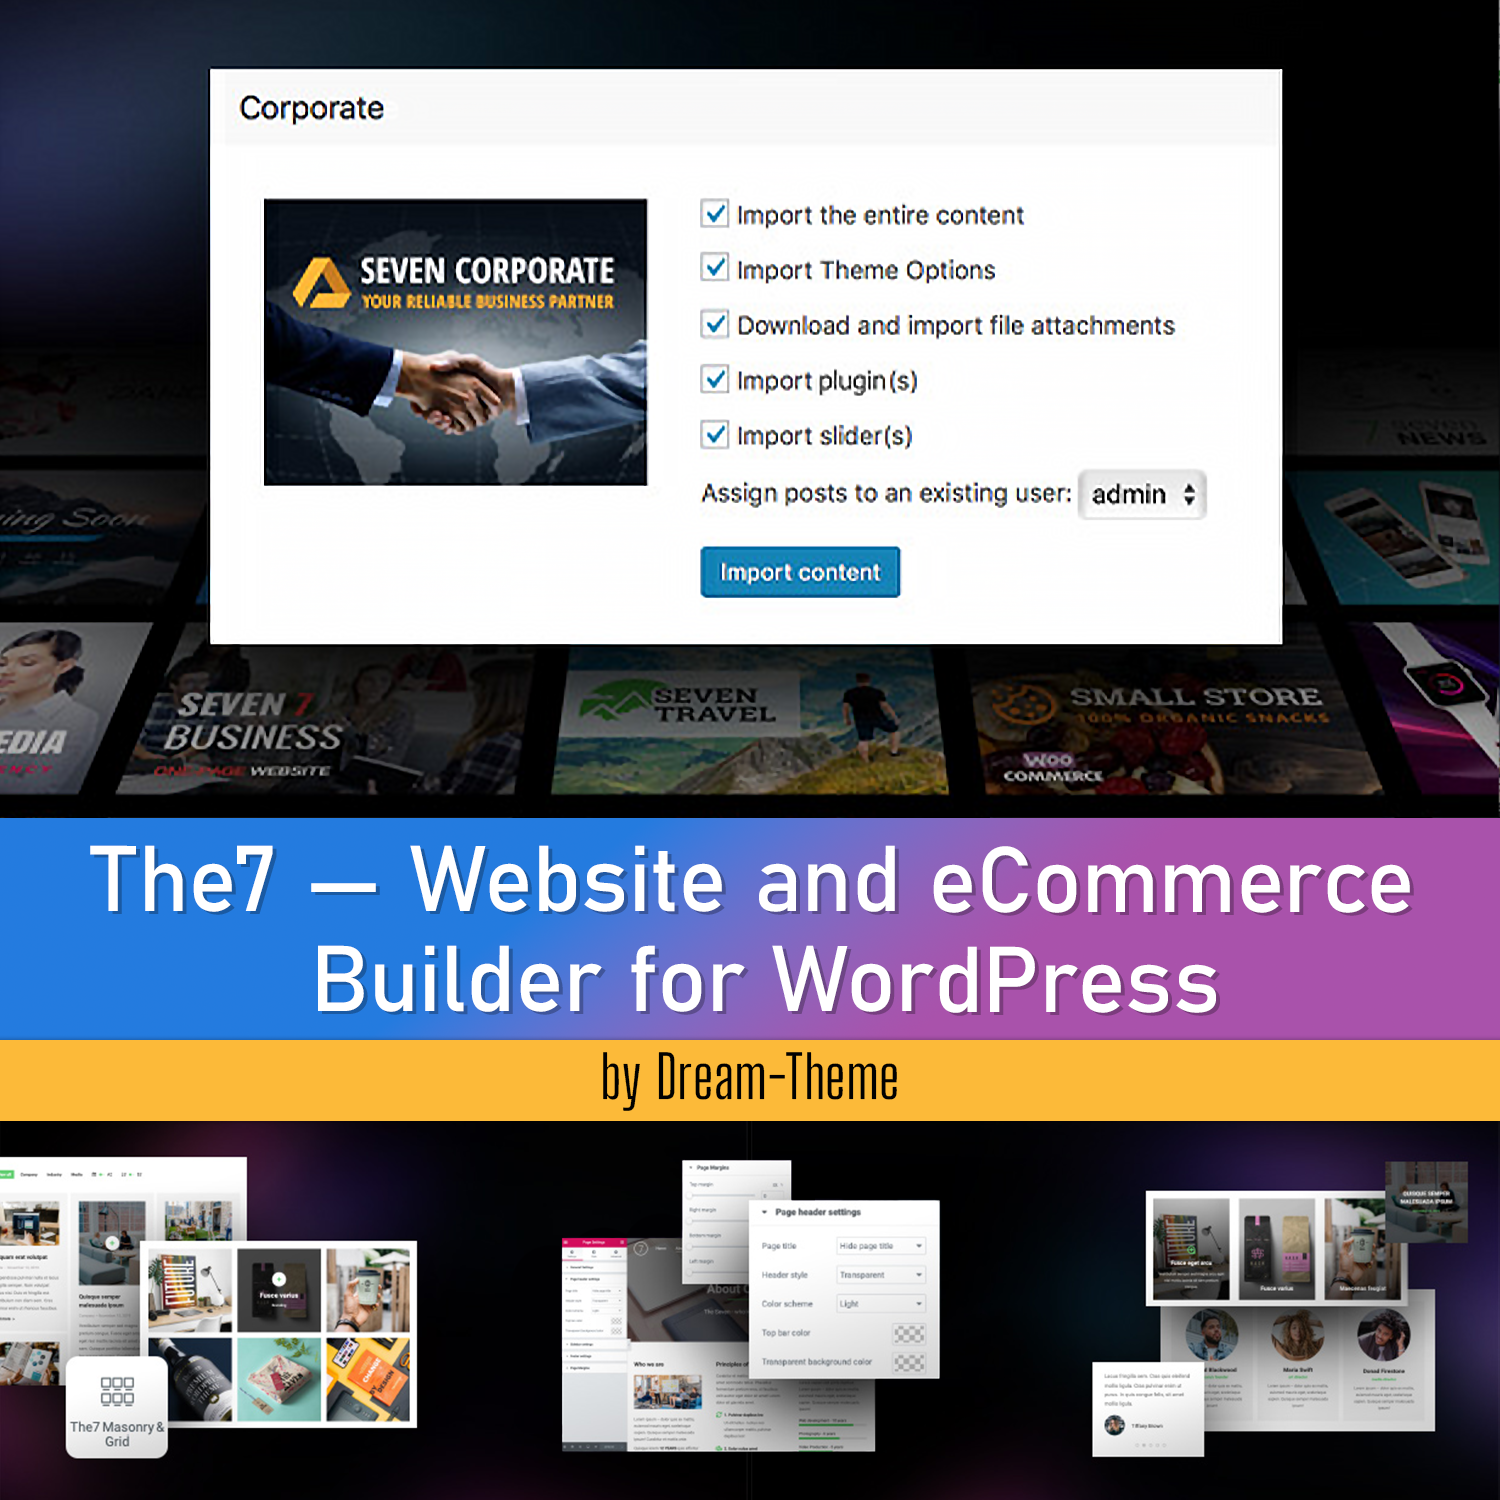 Images with website and ecommerce builder for wordpress.